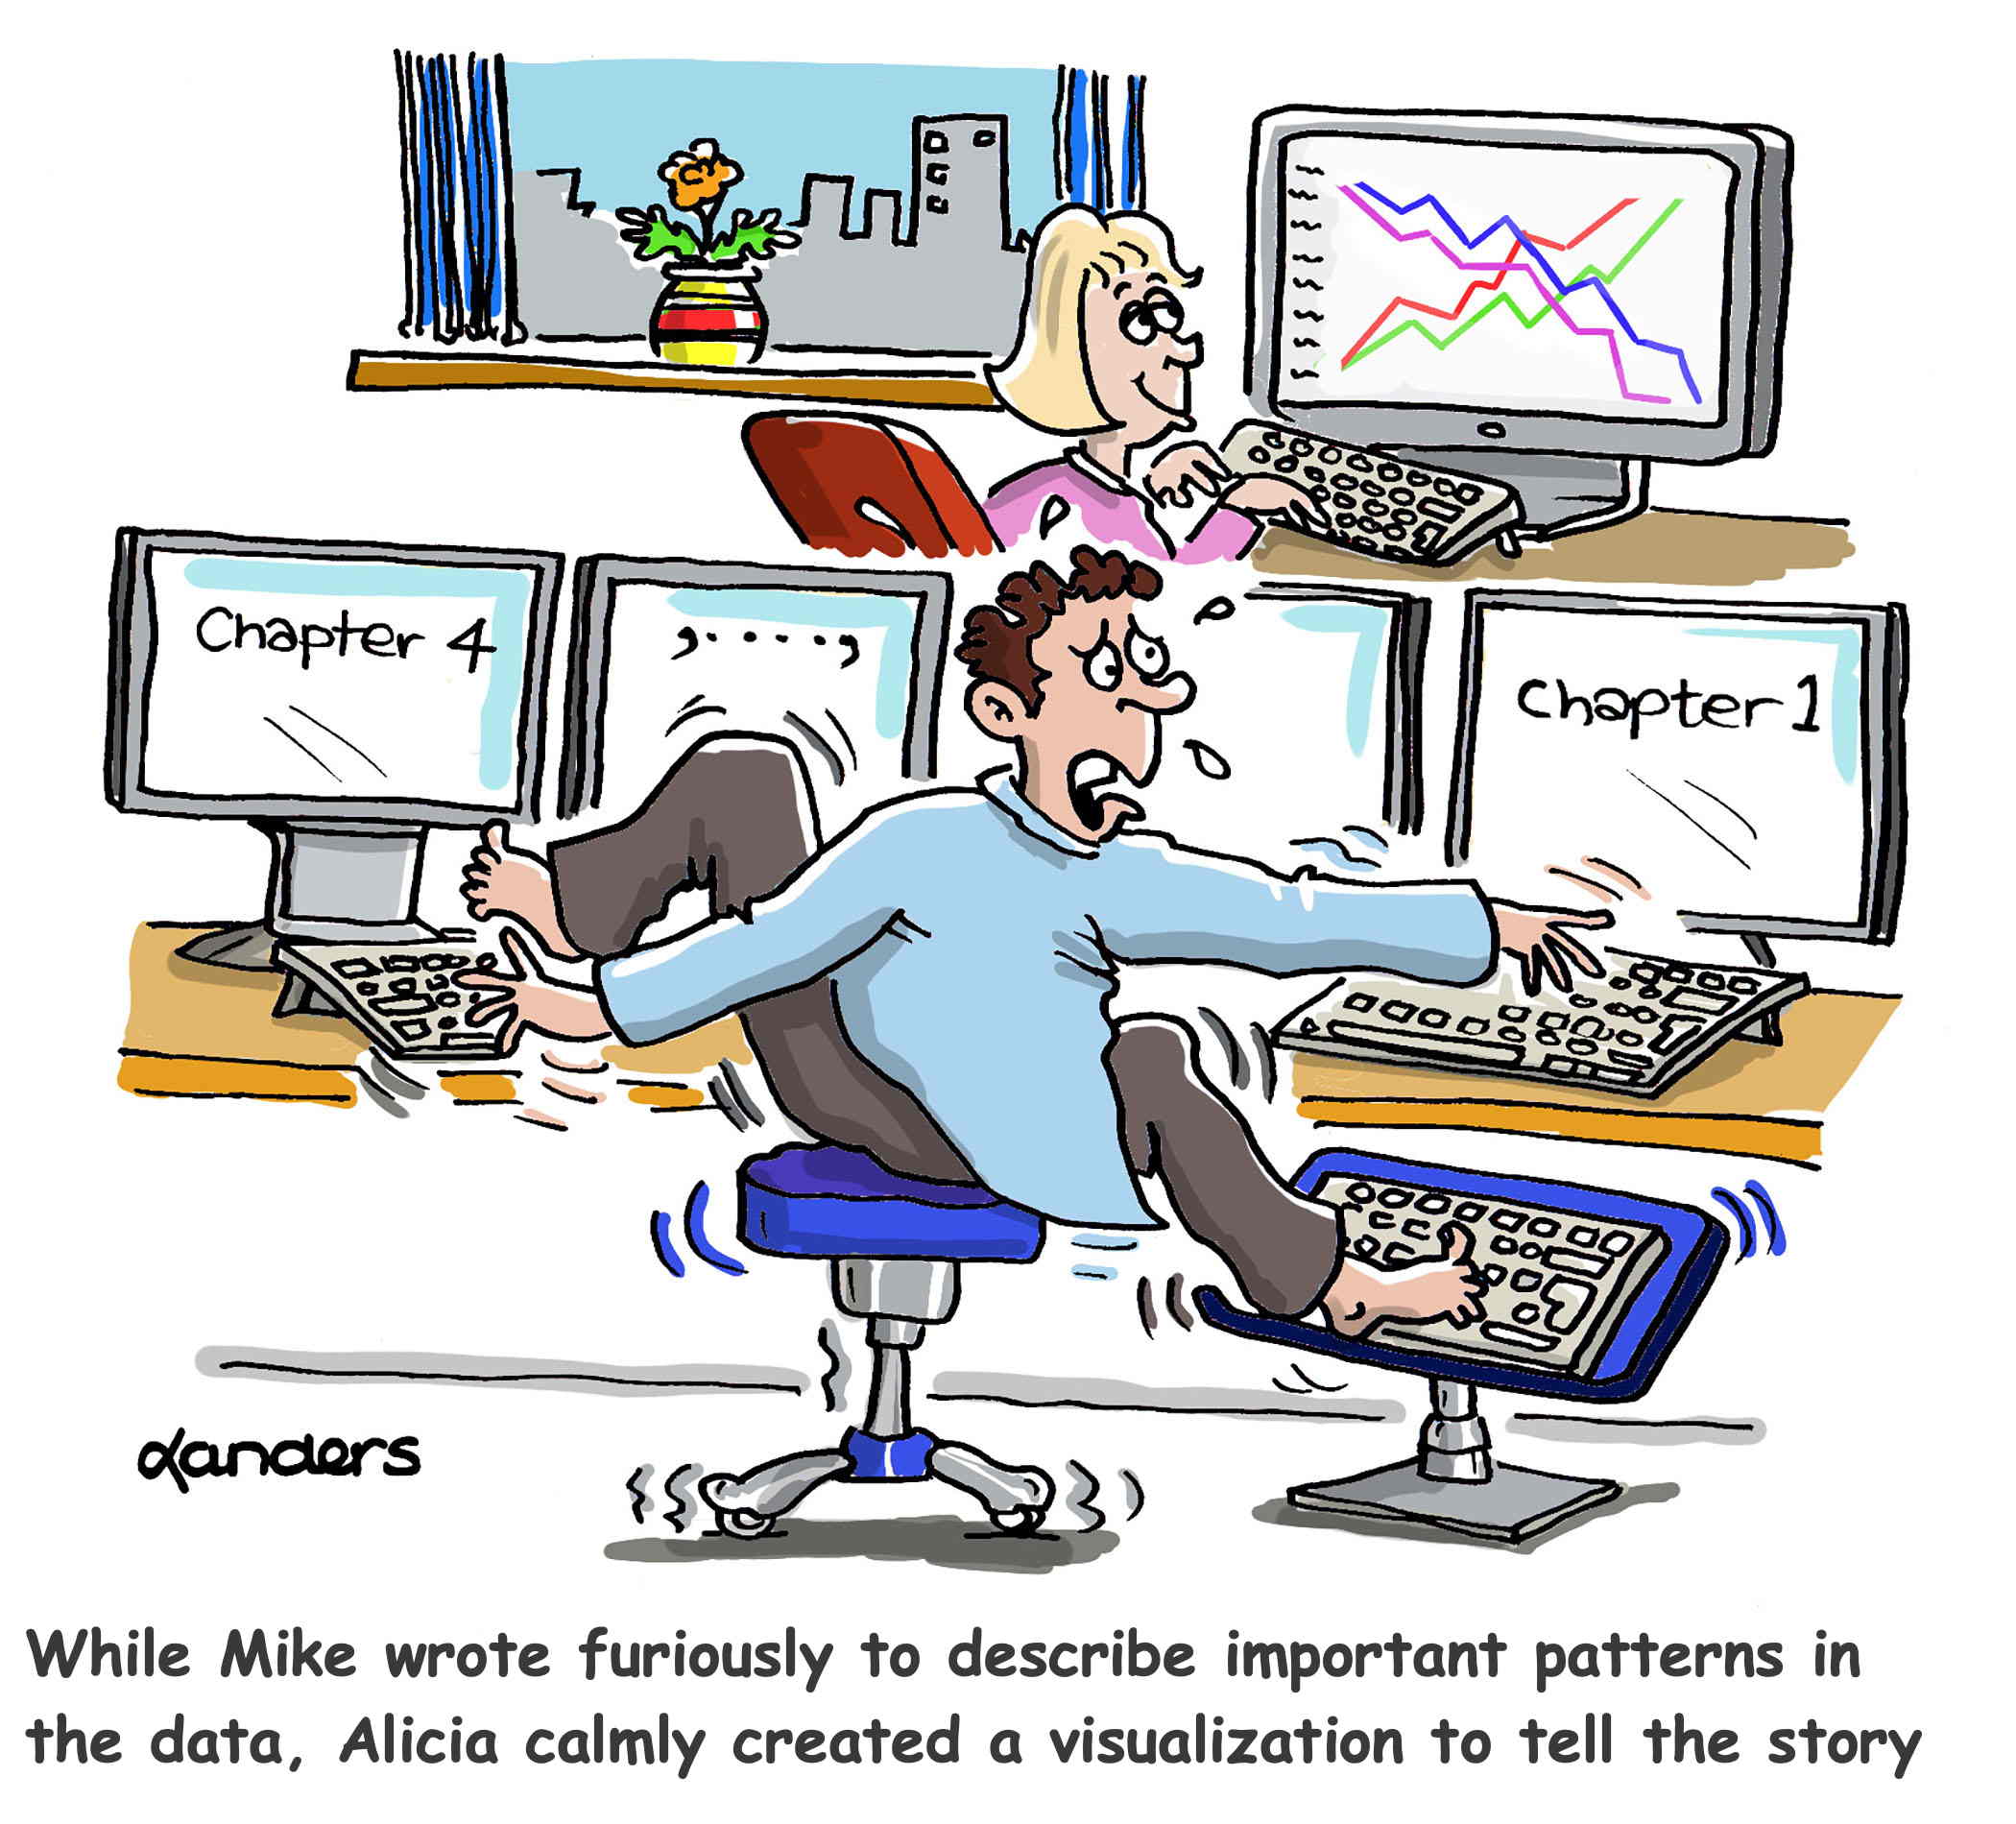 cartoon with man madly working on text on 4 screens while smiling woman has a graph on her one screen.  Caption says: While Mike wrote furiously to describe important patterns in the data, Alicia calmly created a visualization to tell the story.